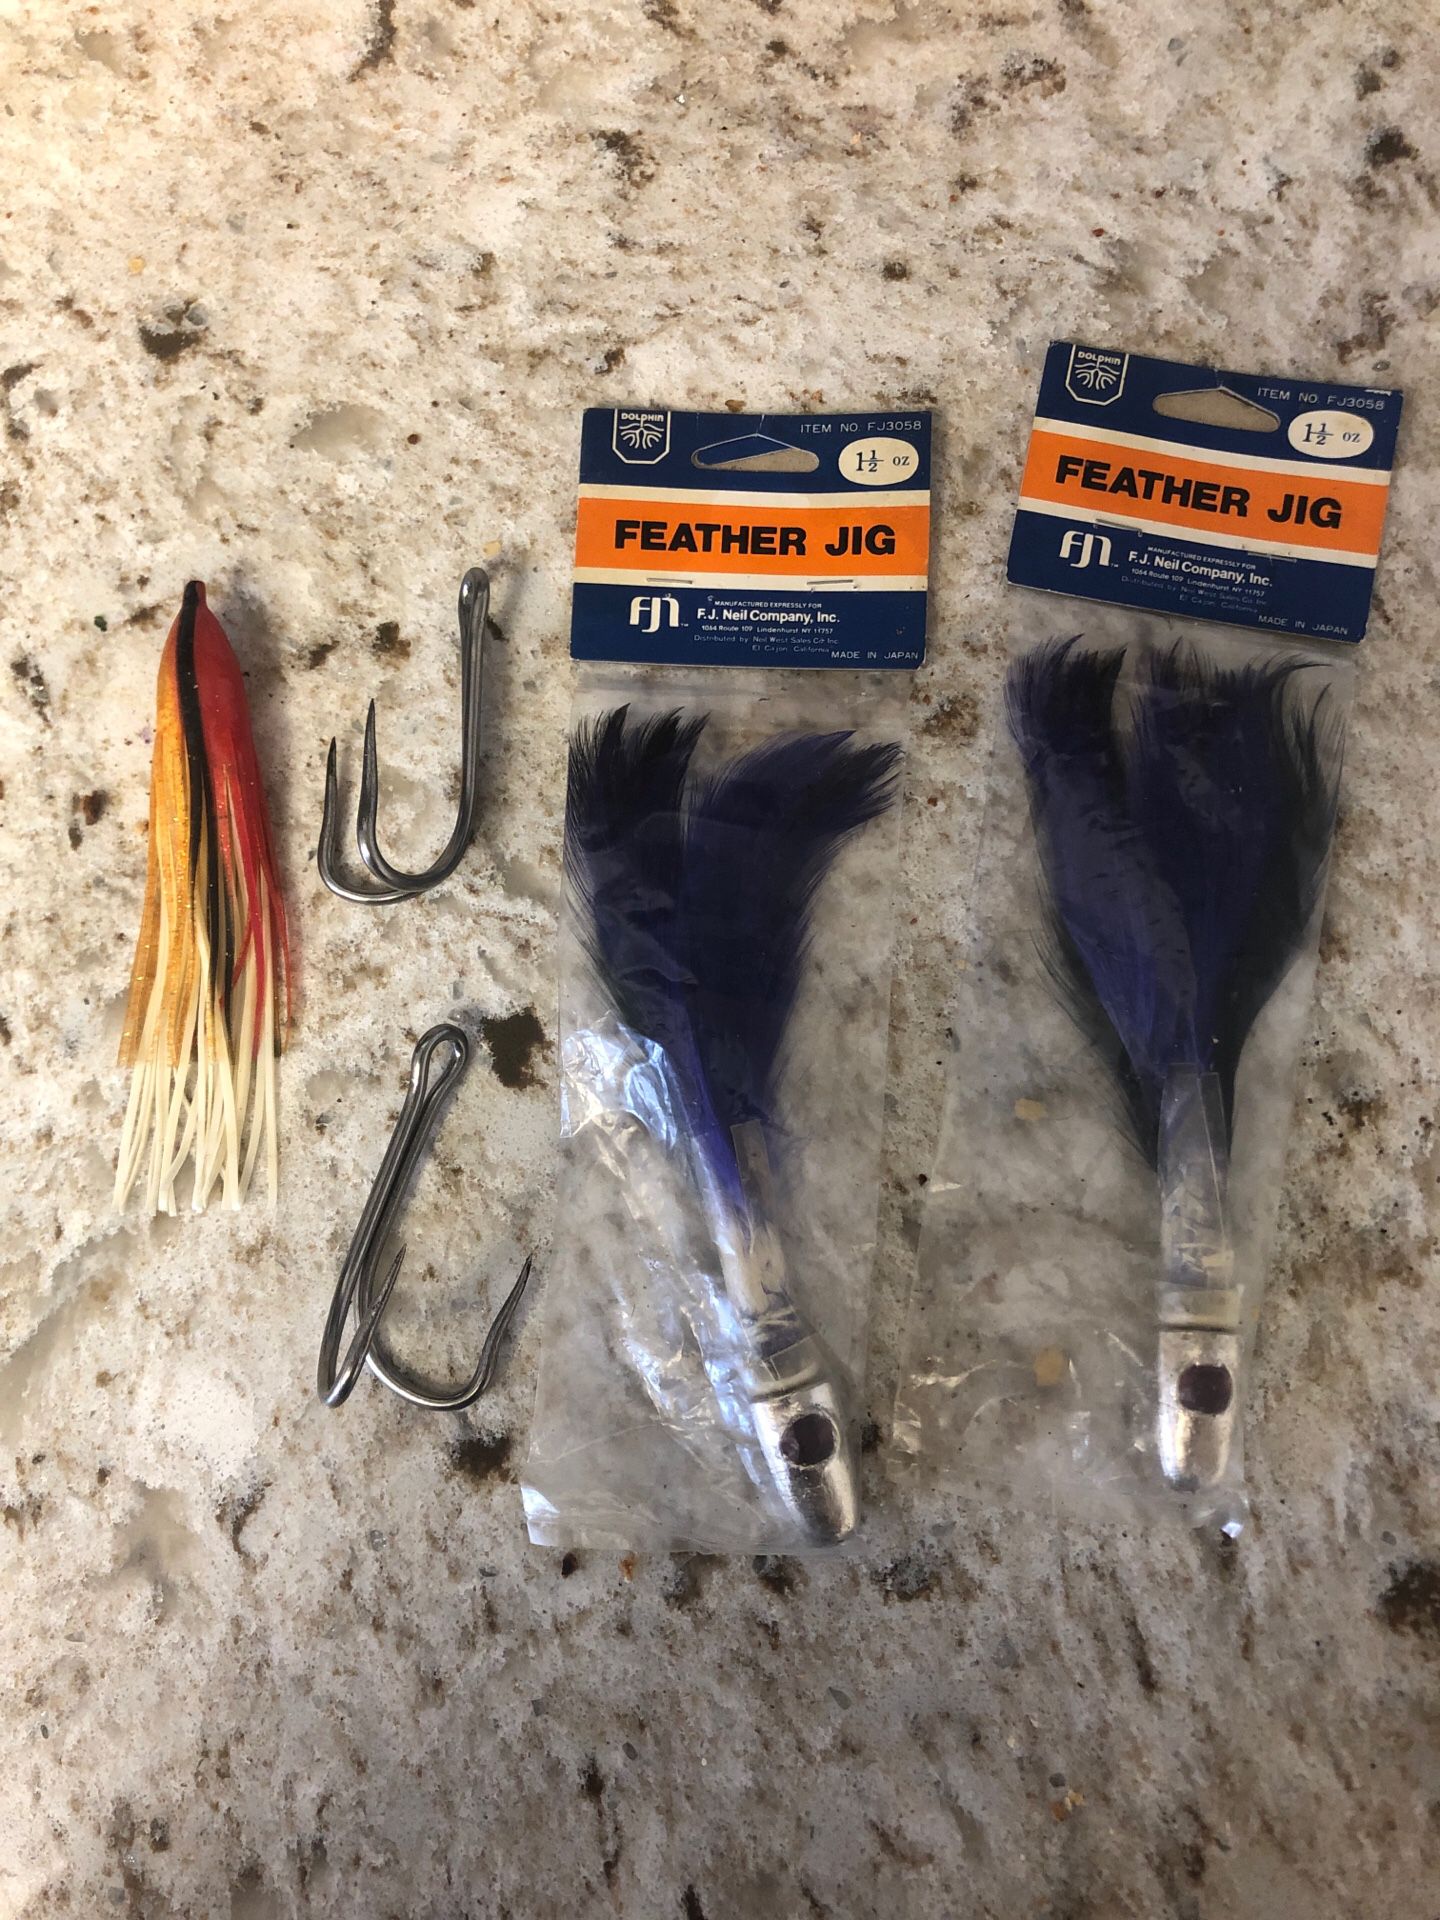 Lot of vintage fishing gear- 2 feather trolling jigs 1.5 oz and 2 double hook fang tuna hooks offshore fishing fj Neil company plastic dolphin